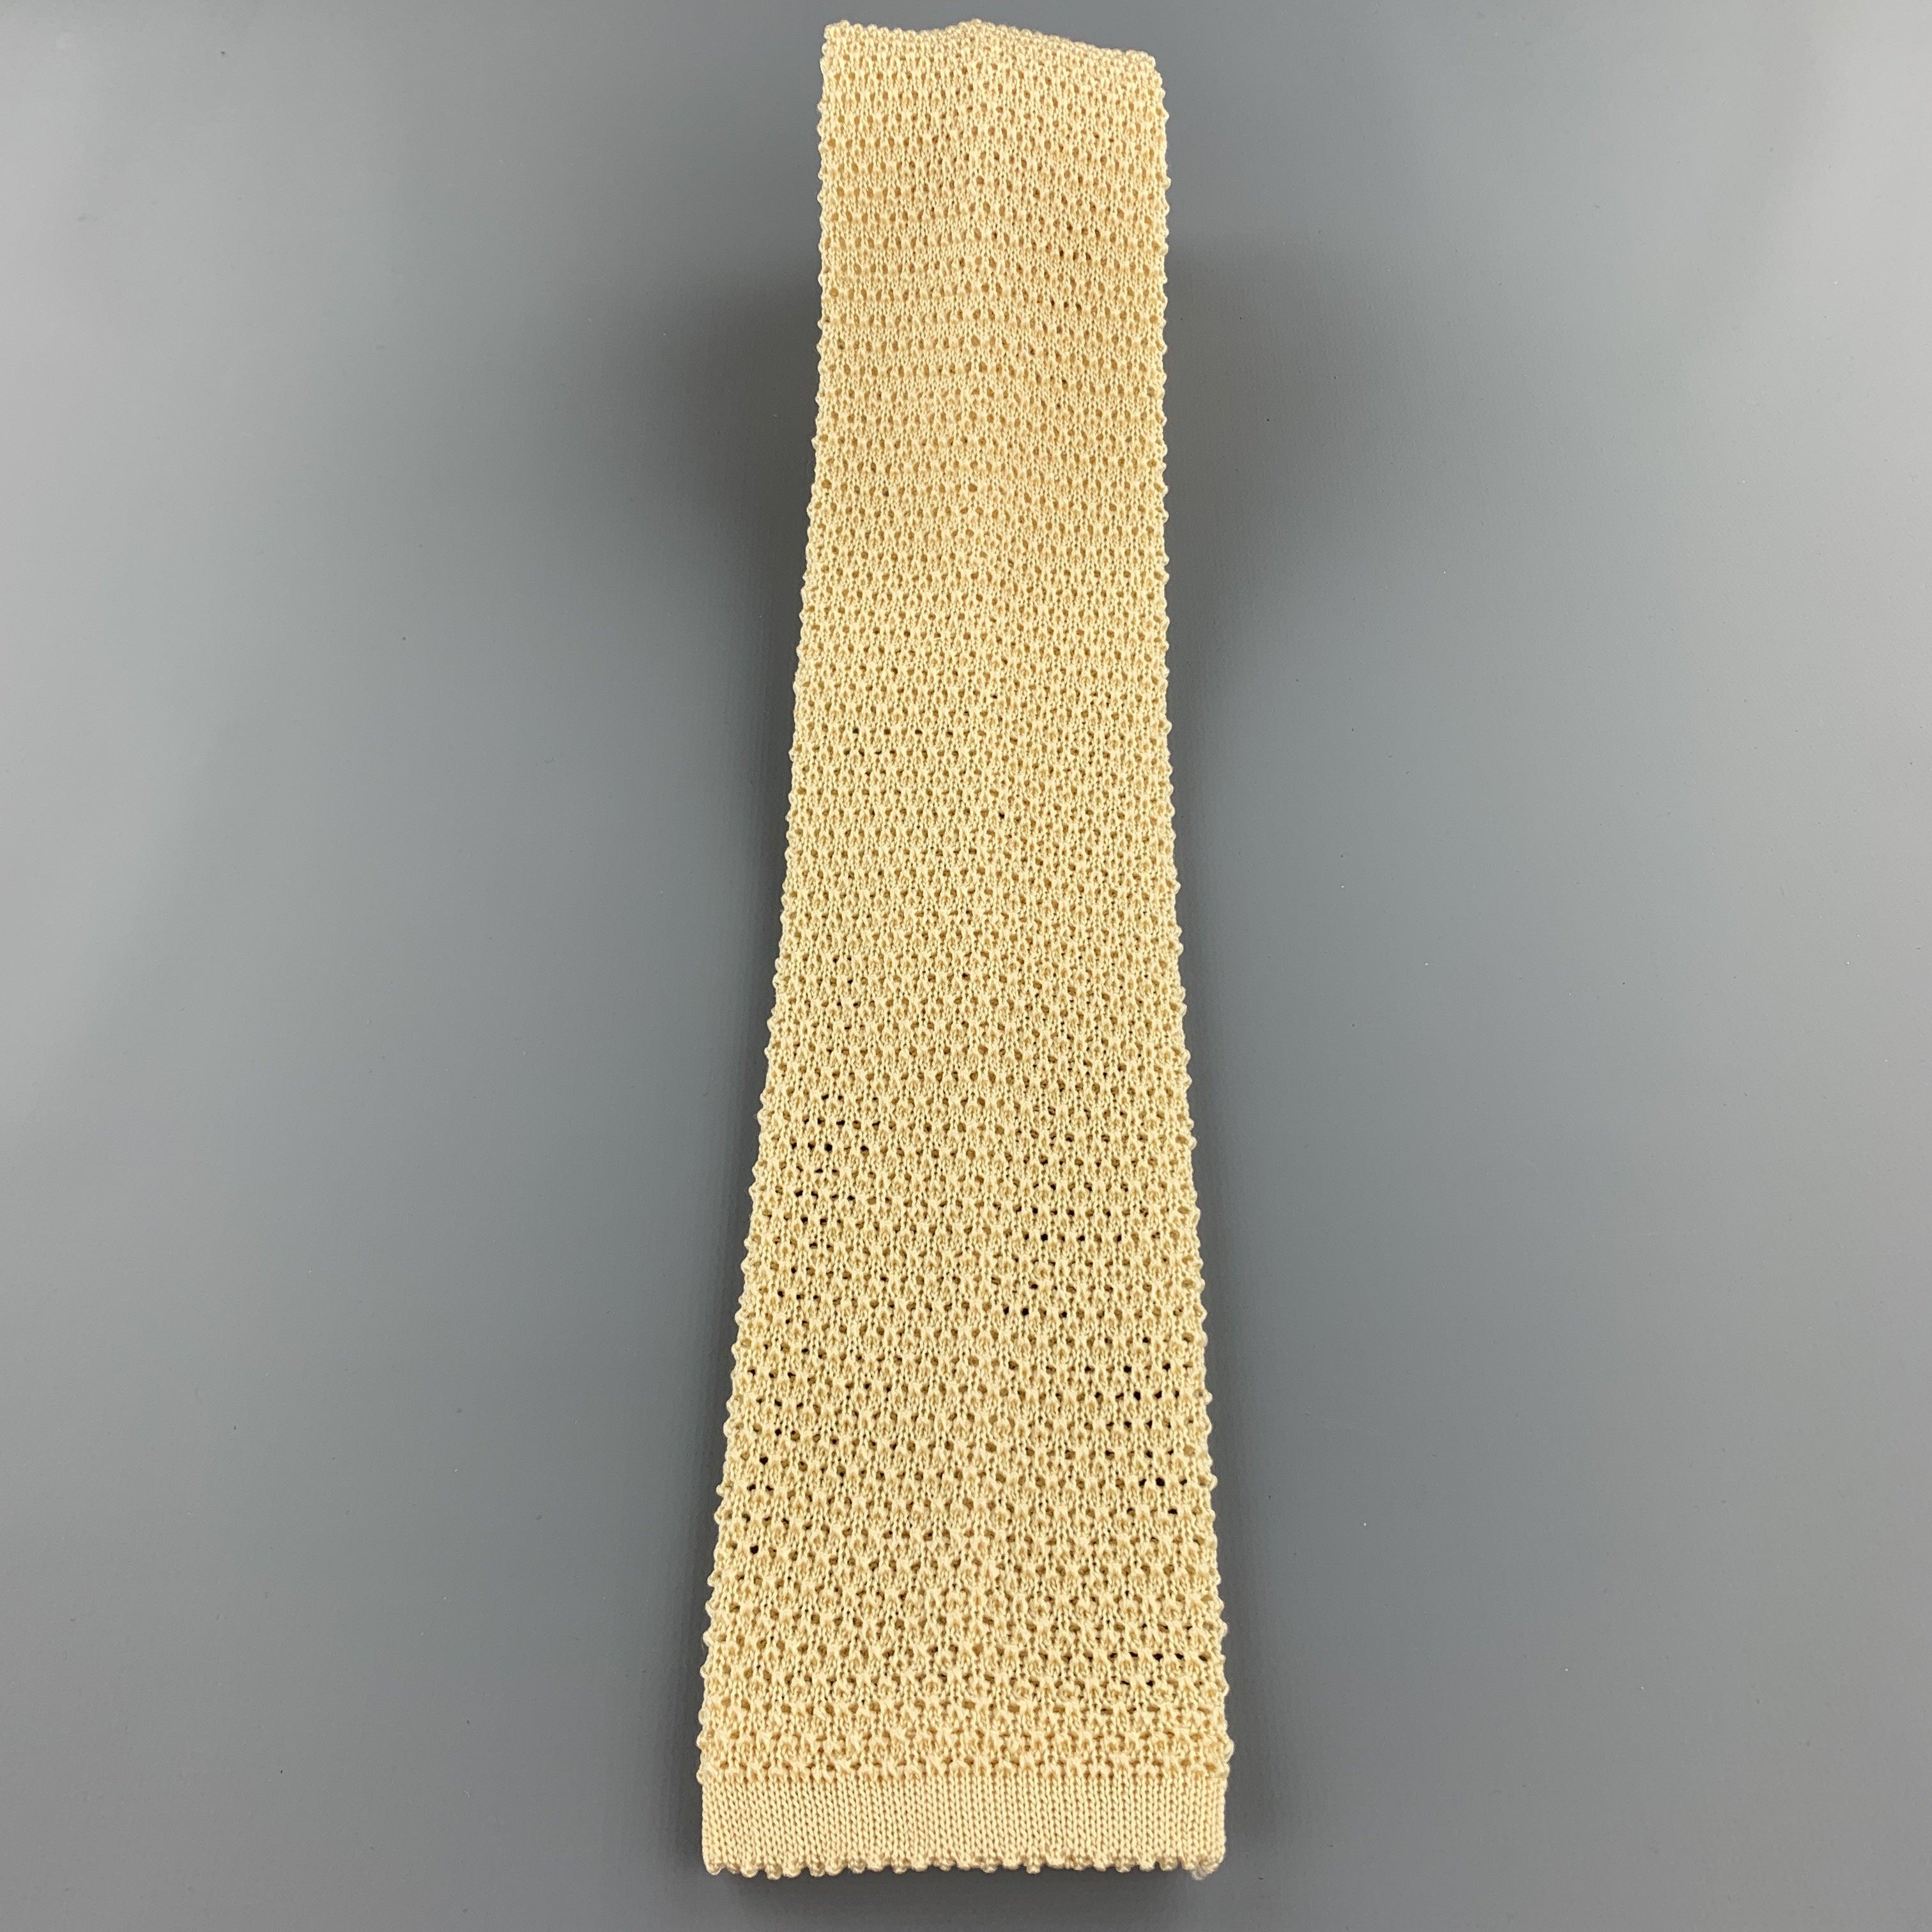 TURNBULL & ASSER Pastel Yellow Silk Textured Knit Tie In Excellent Condition For Sale In San Francisco, CA